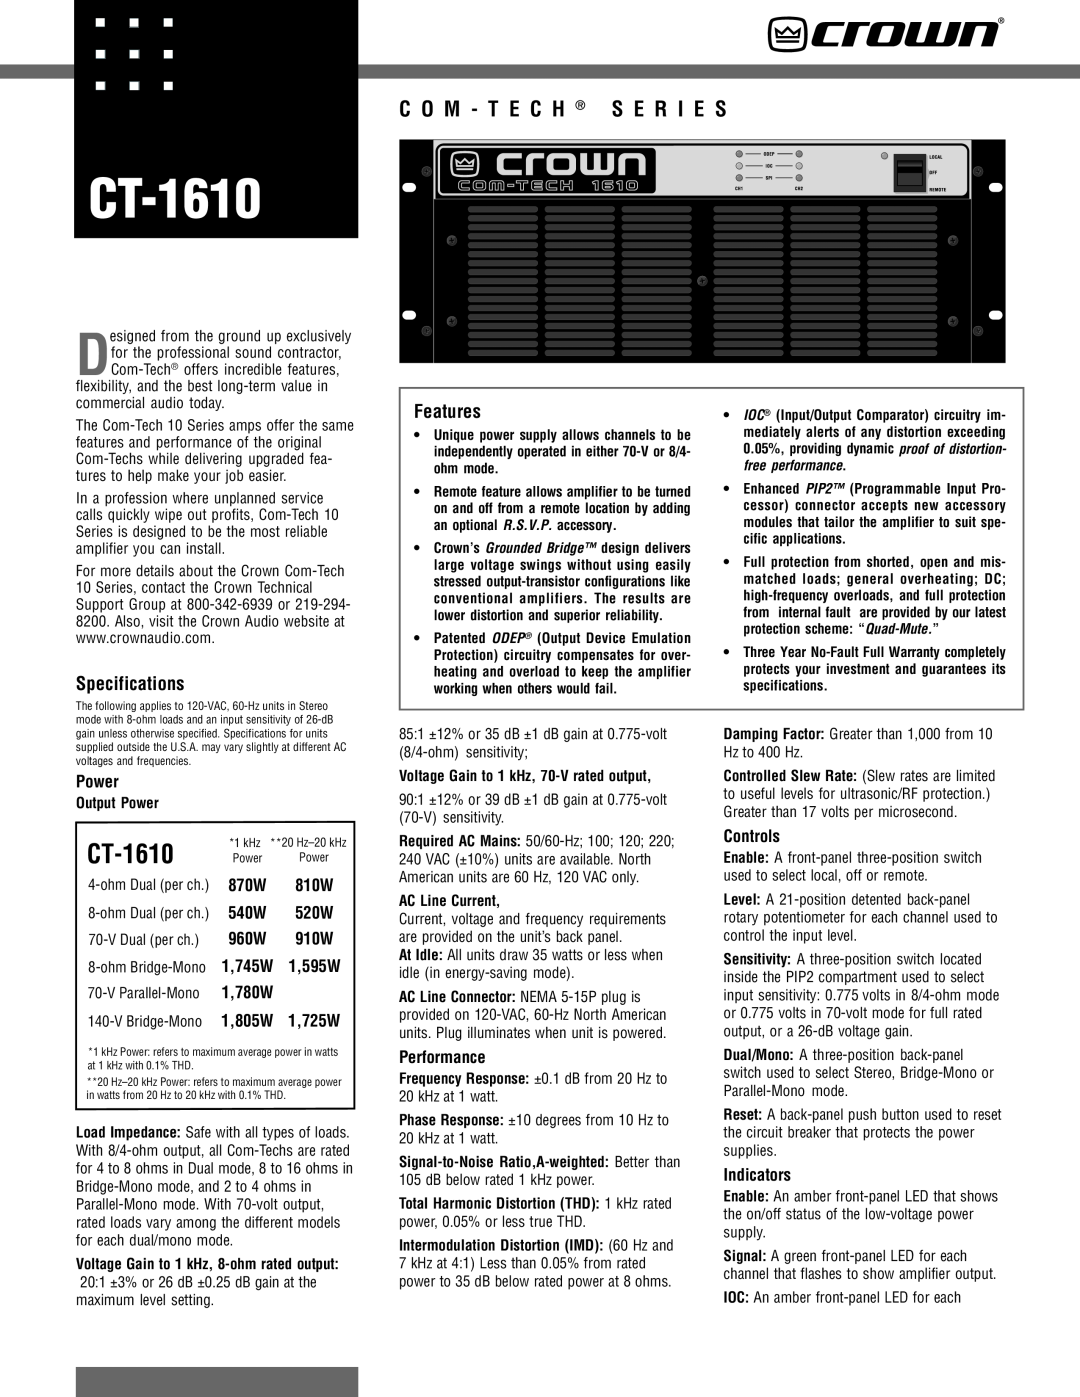 Crown Audio CT-1610 specifications Specifications, Features, Power, Performance, Controls, Indicators, free performance 